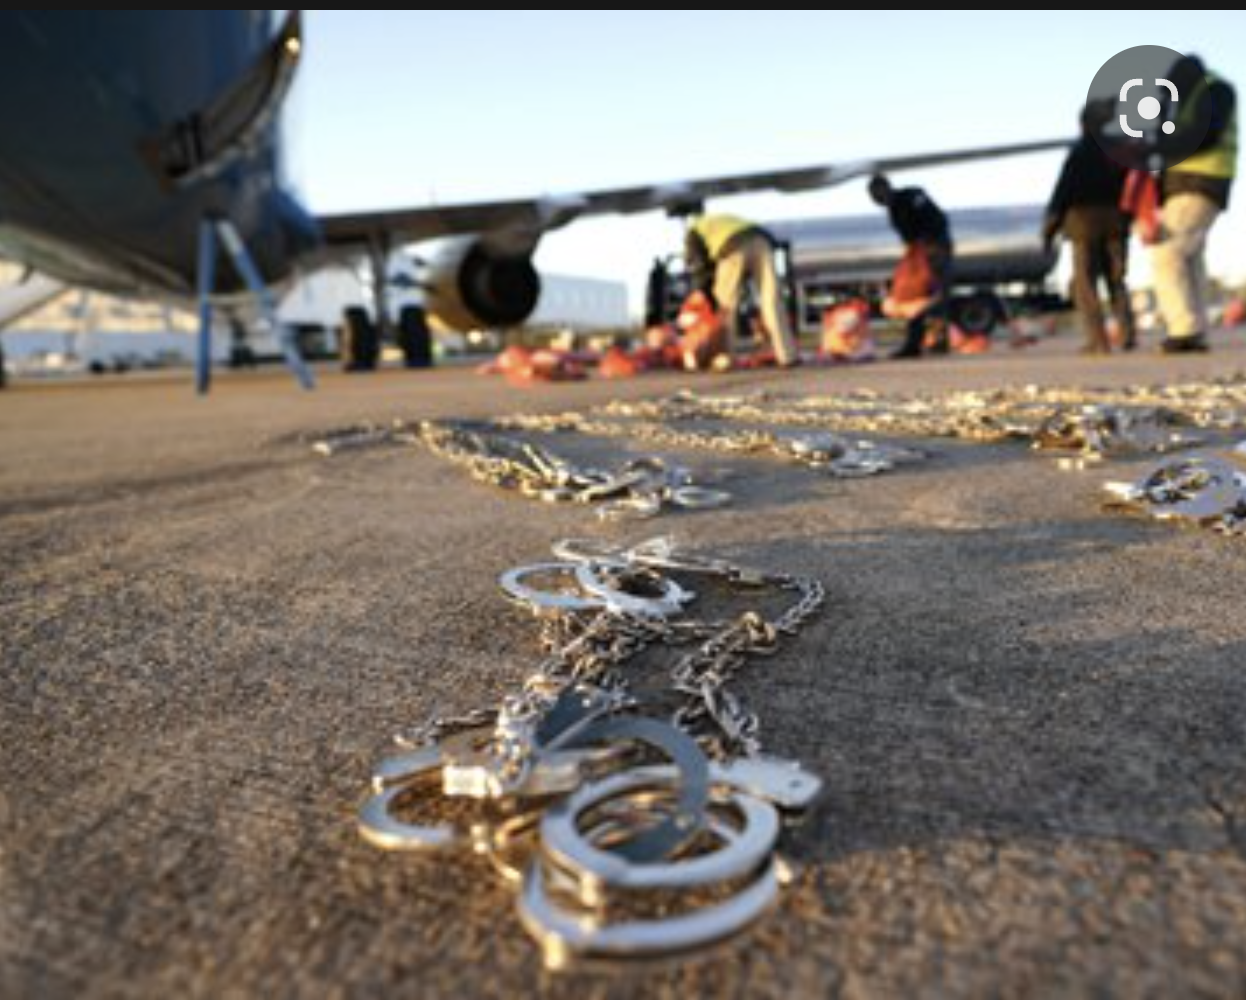 Restraints lie on the tarmac as personal belongings of immigrants who entered the United States illegally are loaded onto a plane